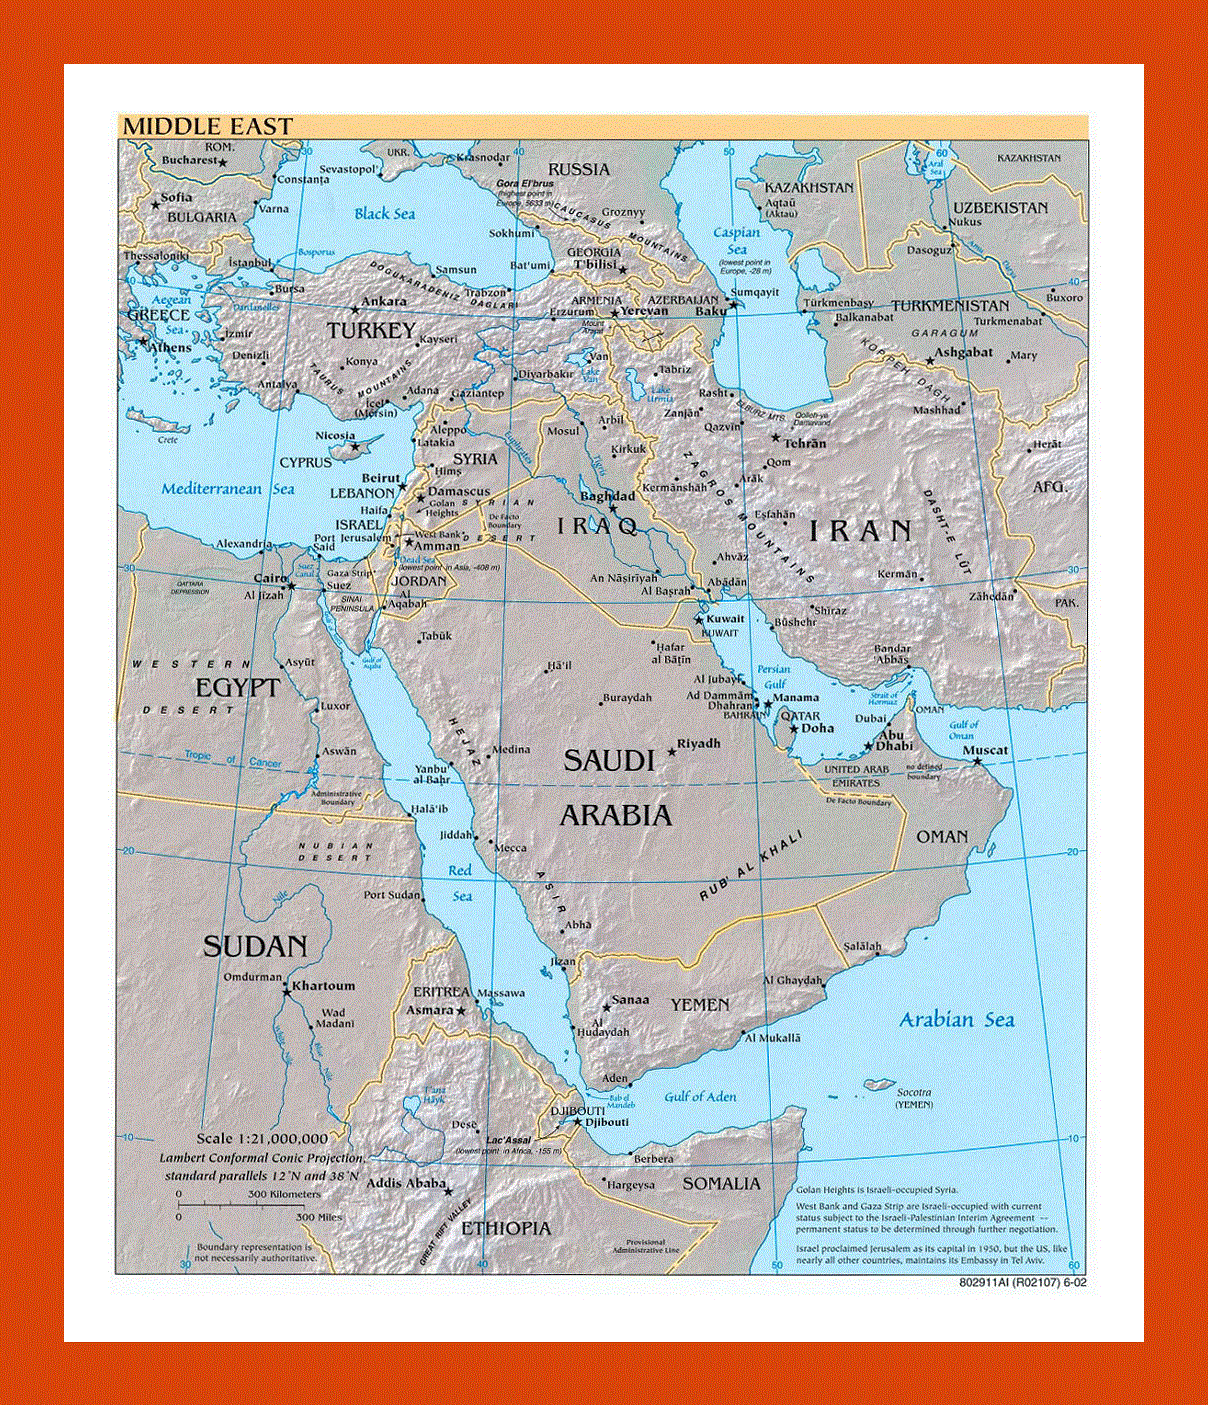 Political map of the Middle East - 2002